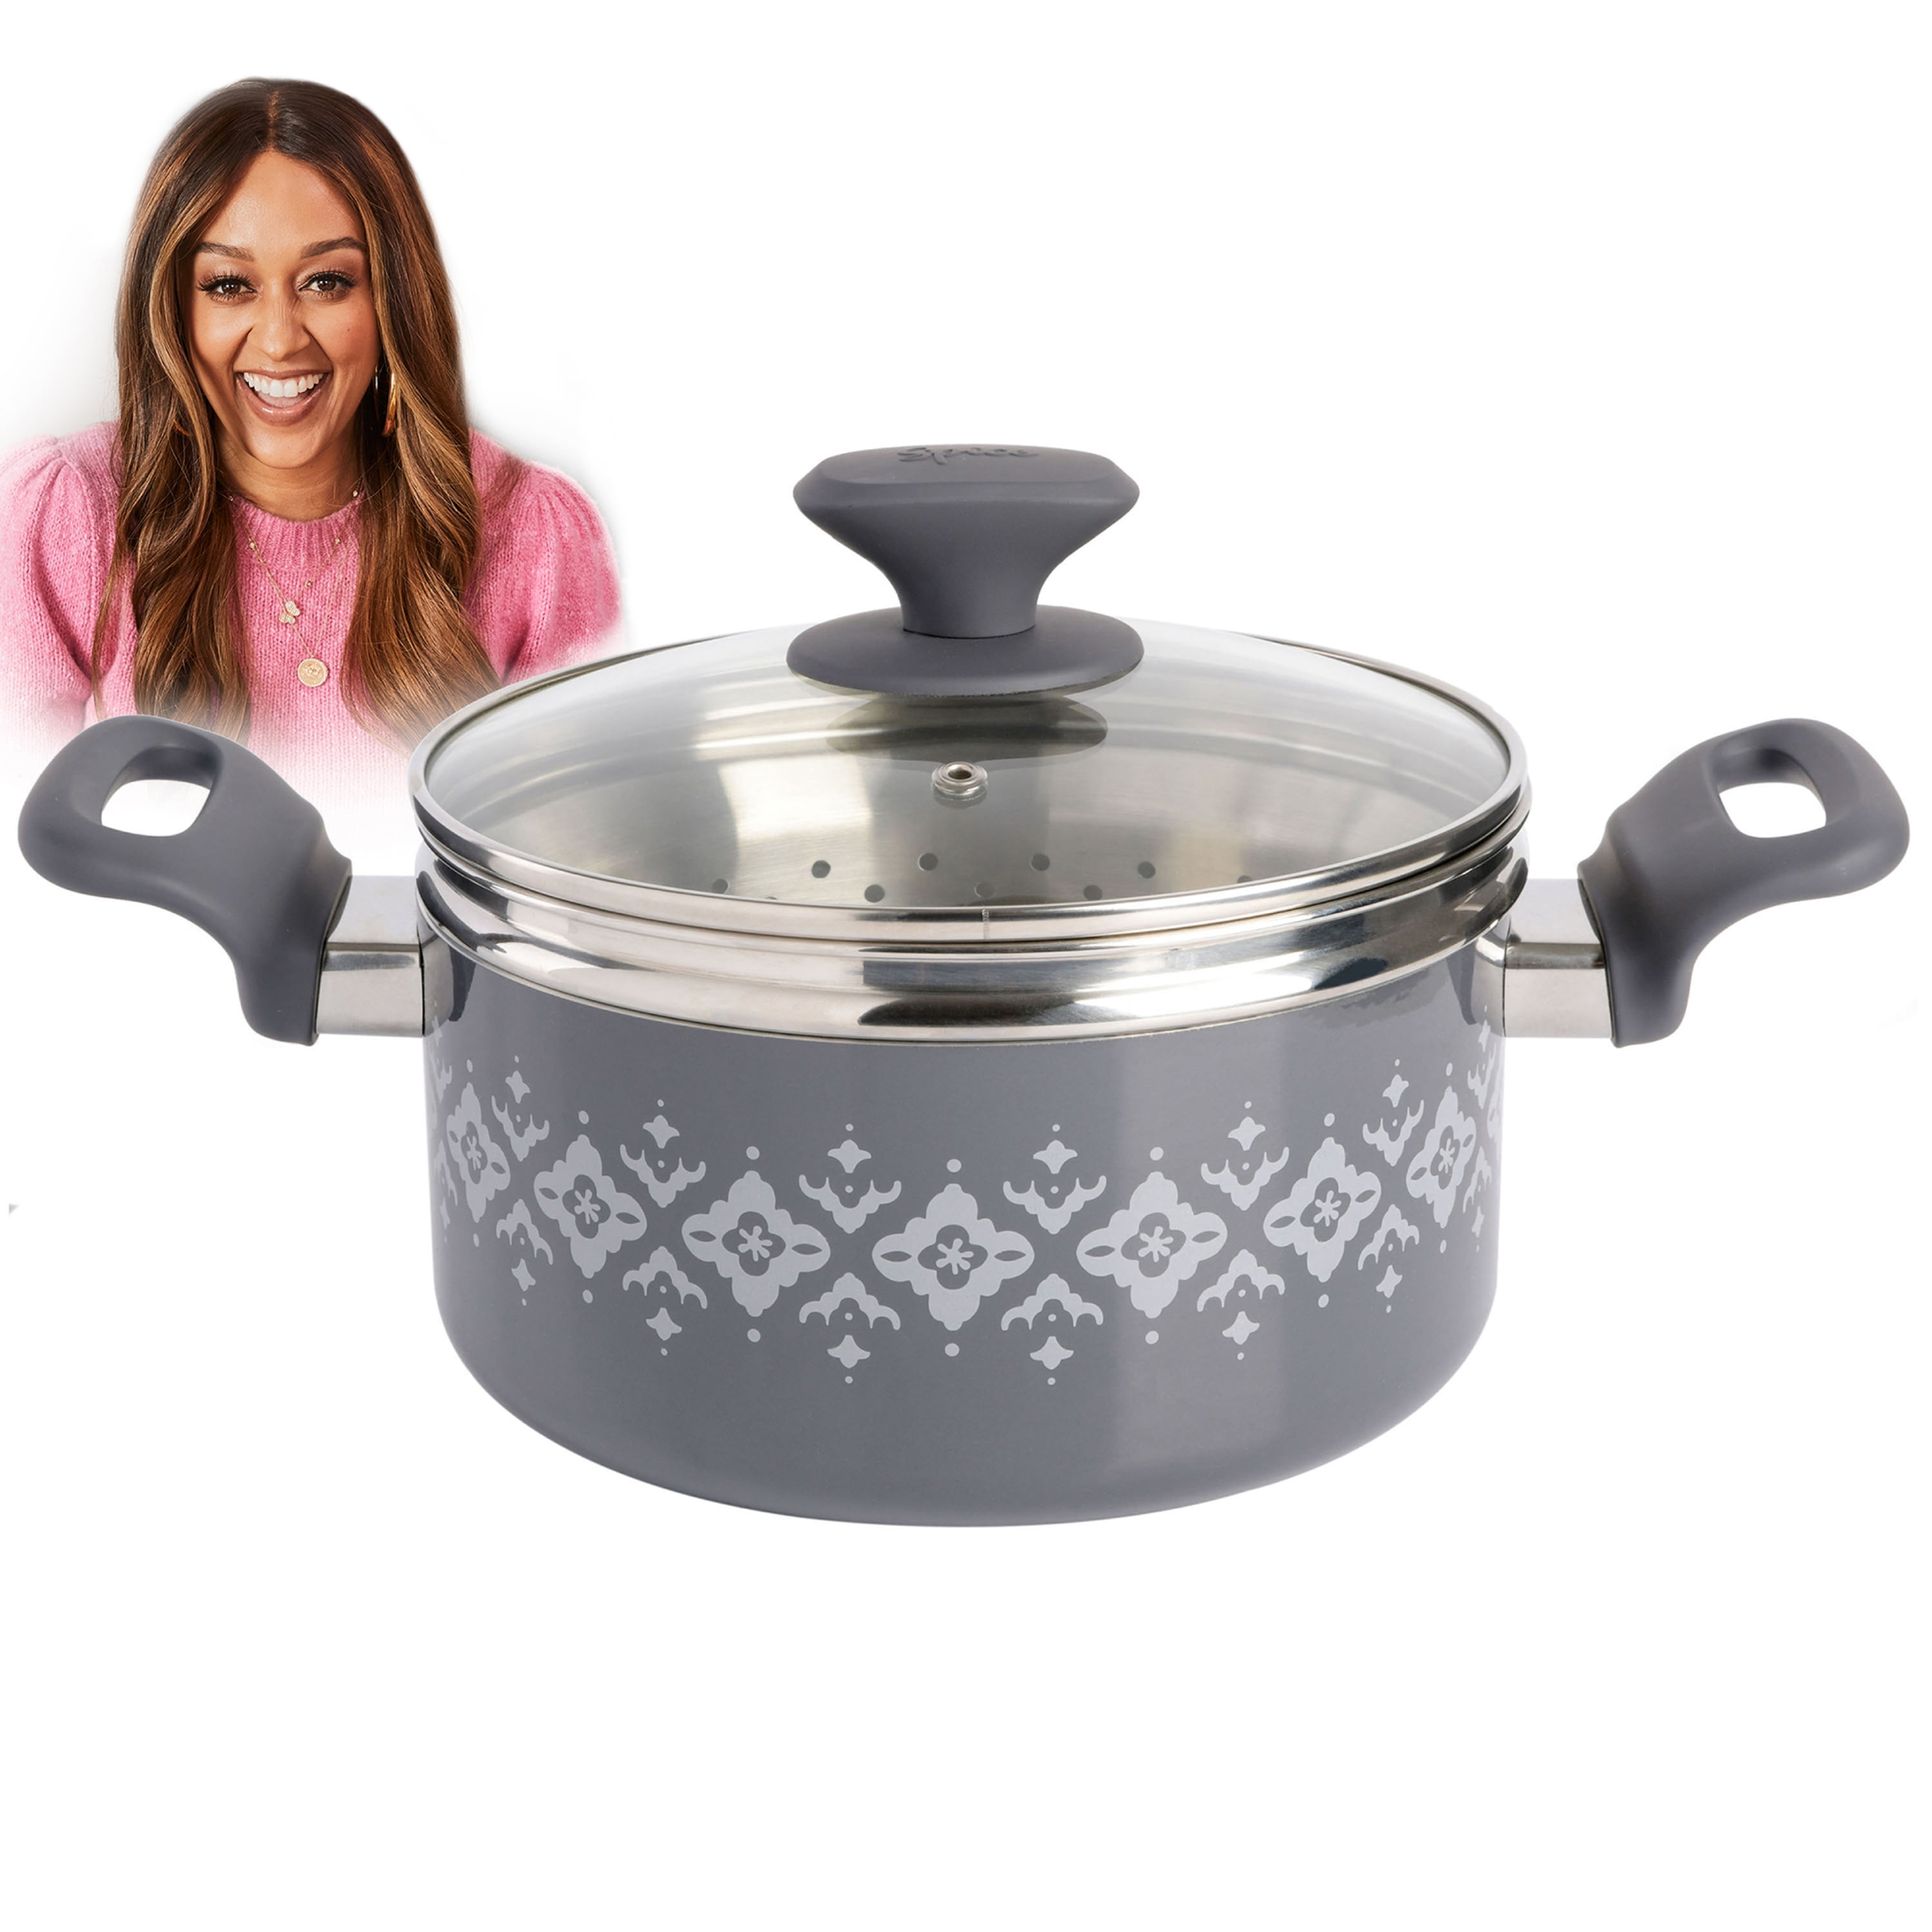 Spice by Tia Mowry - Healthy Nonstick Ceramic 3QT Charcoal Aluminum Dutch  Oven with Steamer 